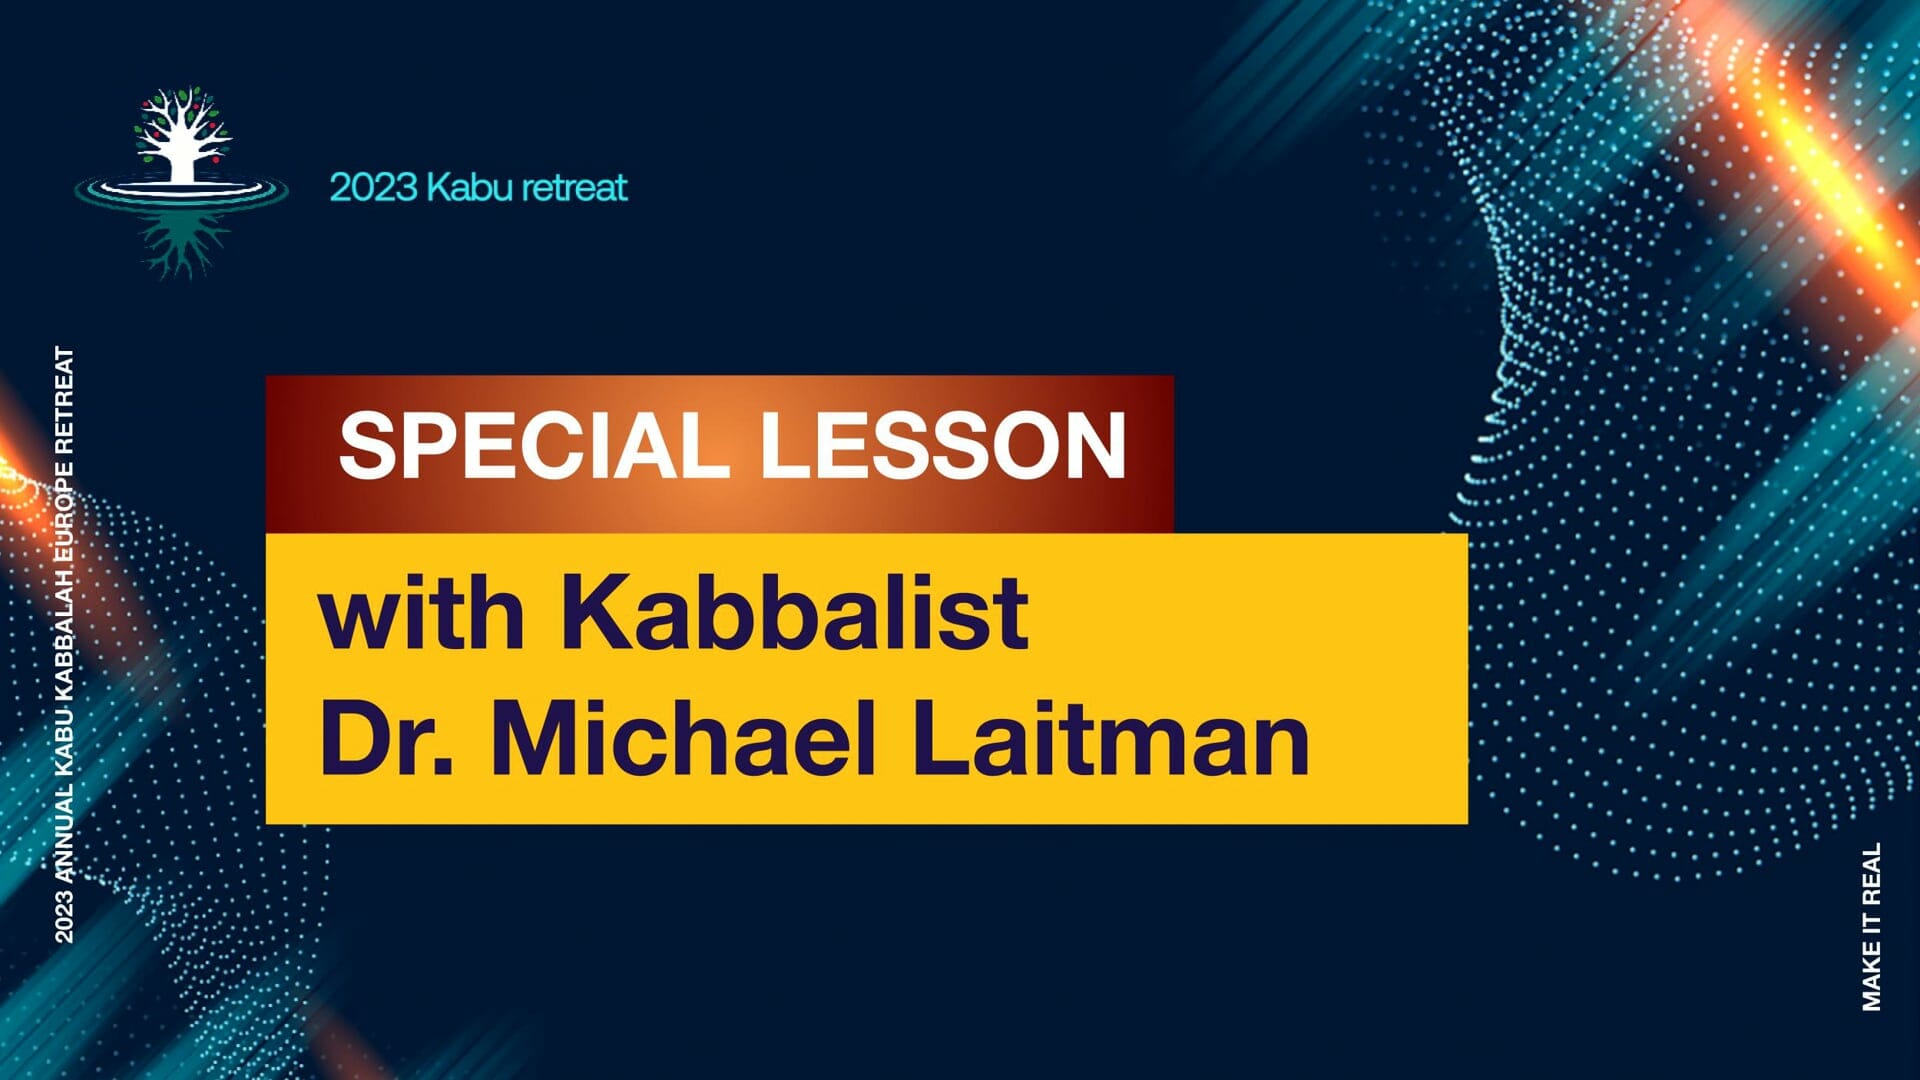 May 07, 2023 – Special Lesson with Kabbalist Dr. Michael Laitman